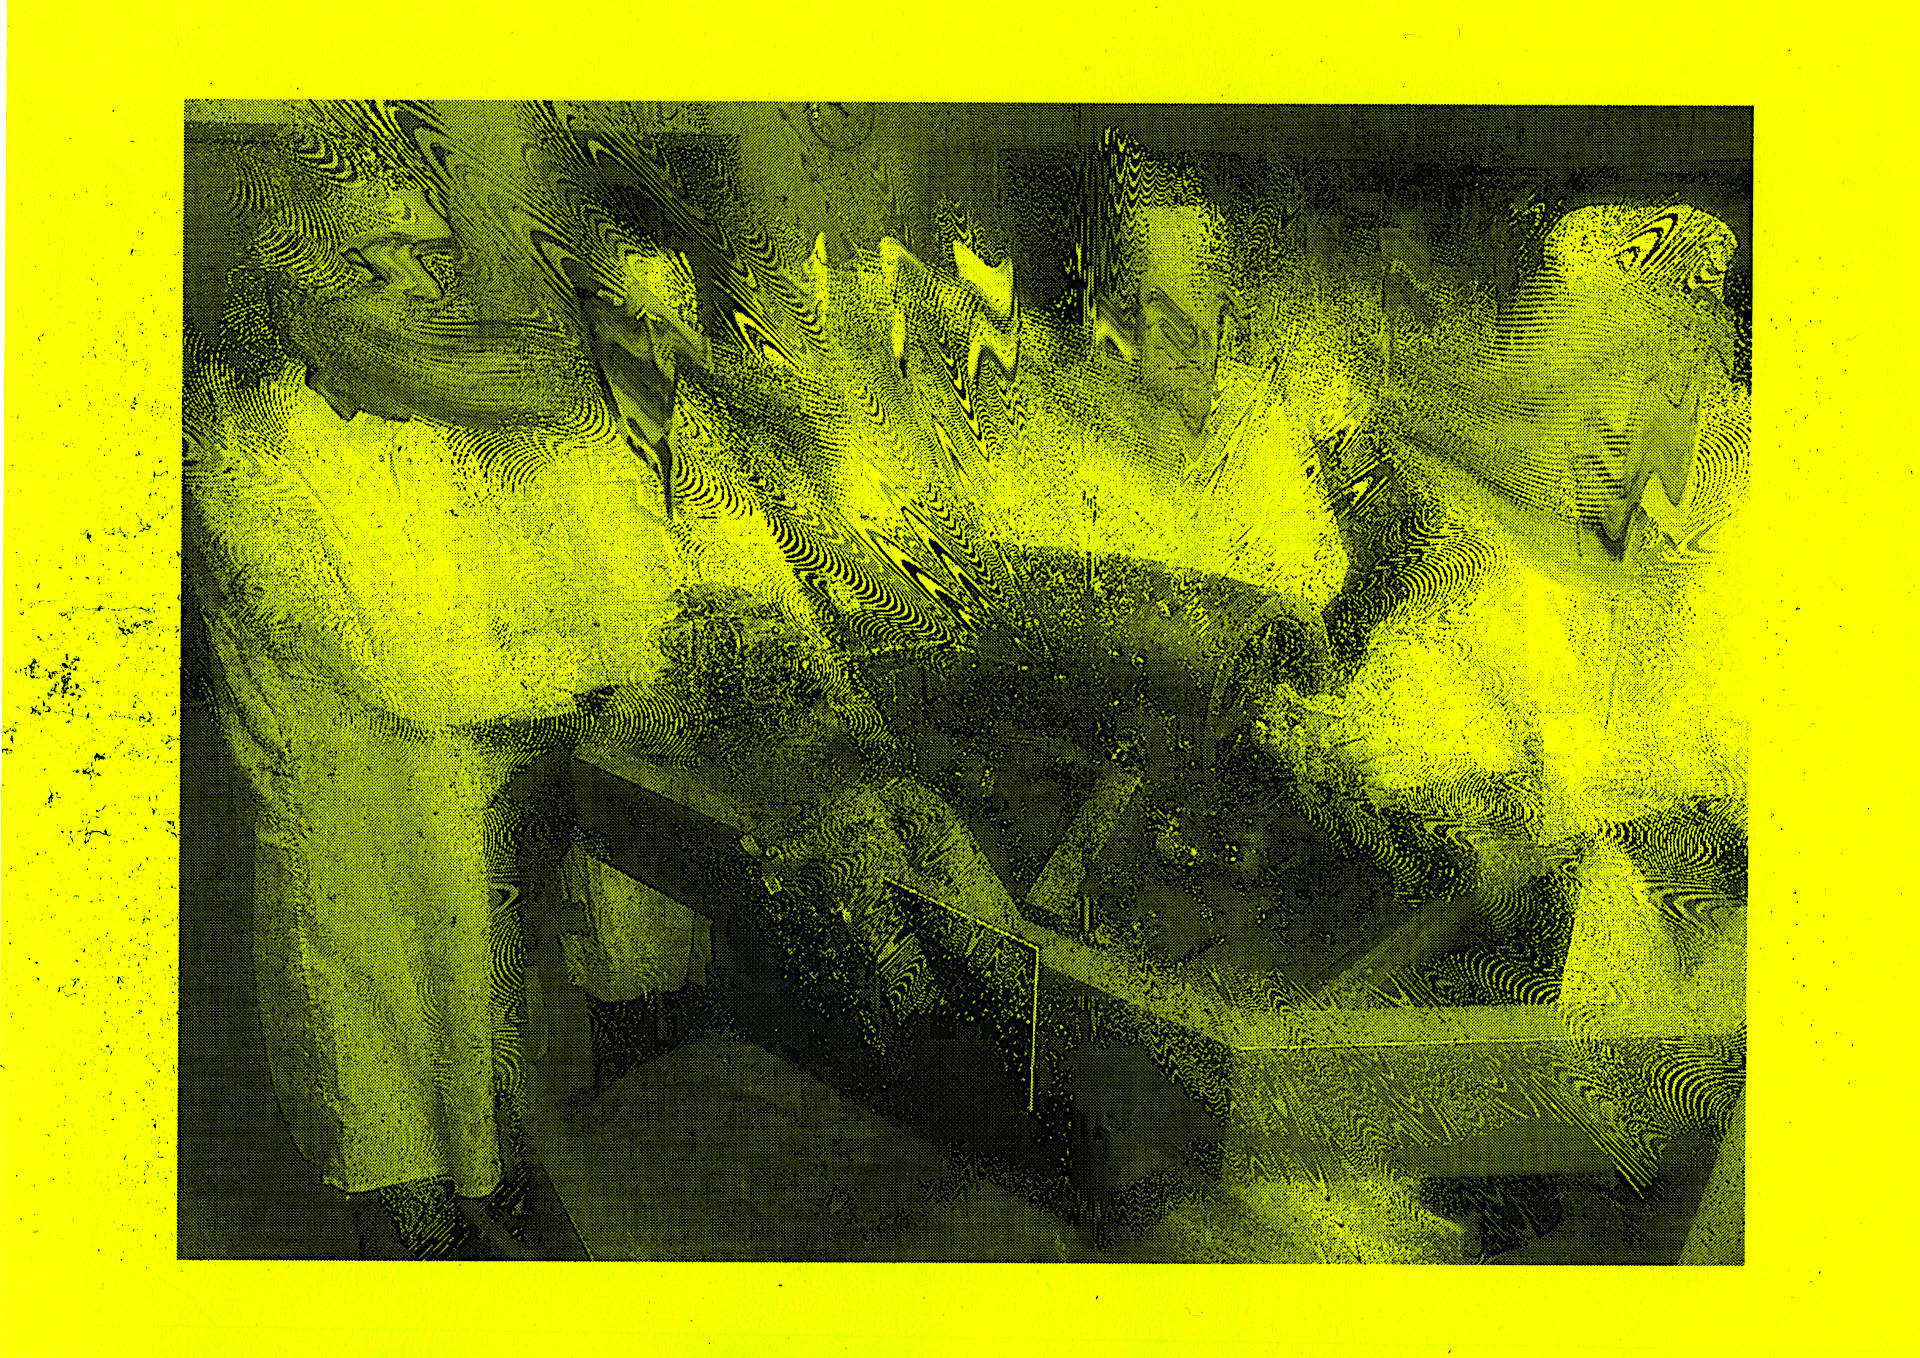 black laser print on yellow neon paper. A group of people with white coats standing around a machine, operating the machine. The image is distorted and the faces wobble in glitch